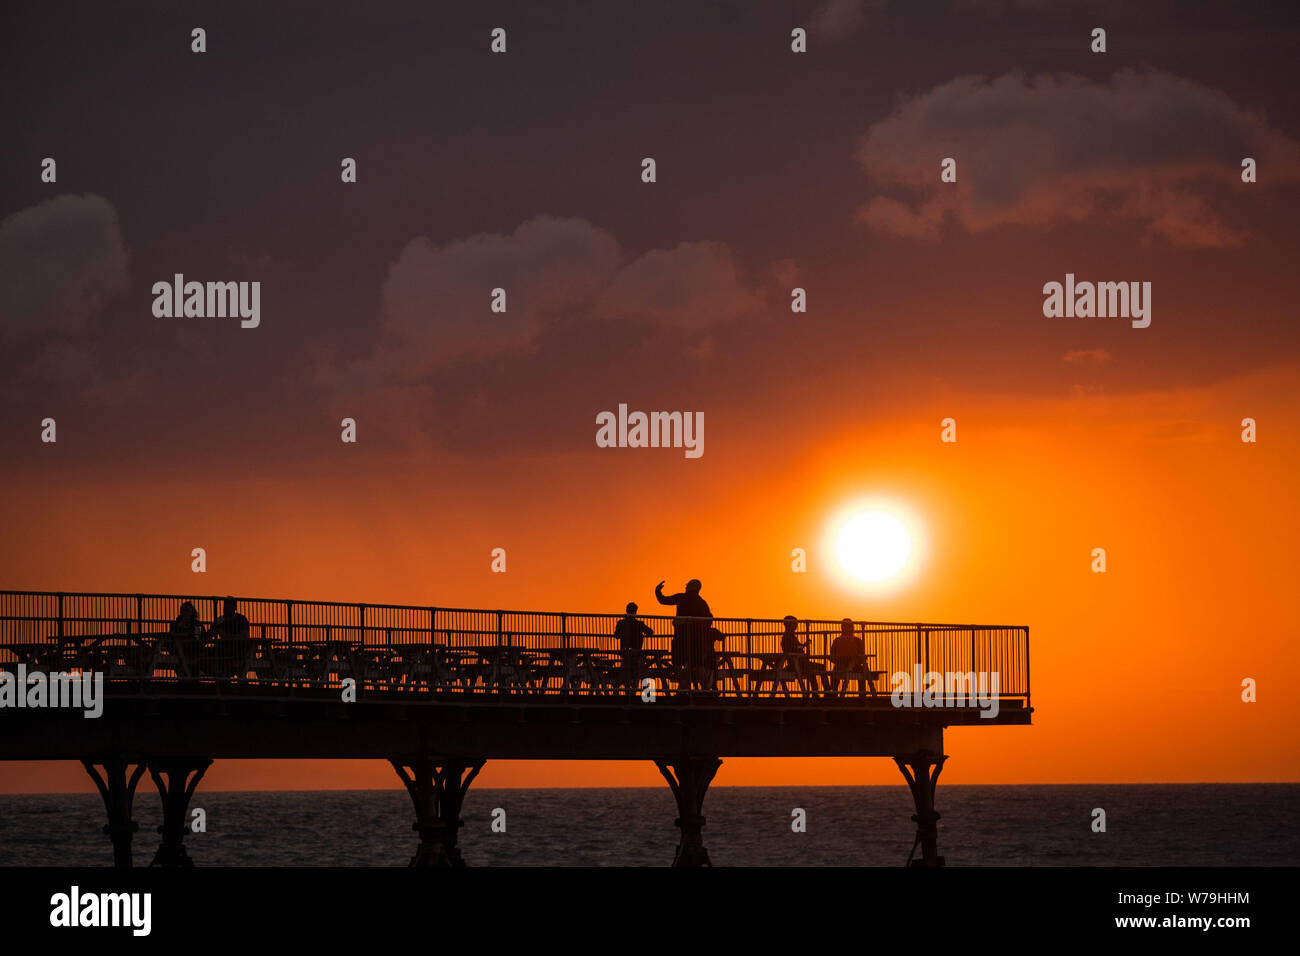 Aberystwyth, Wales, UK. 5th Aug 2019.  People on the Royal Pier in Aberystwyth are silhouetted as they watch the fiery sunset at the end of a breezy but bright August day. The weather is forecast to become more unsettled towards the weekend, with outbreaks of rain in many places  Photo credit : Keith Morris/Alamy Live News Stock Photo